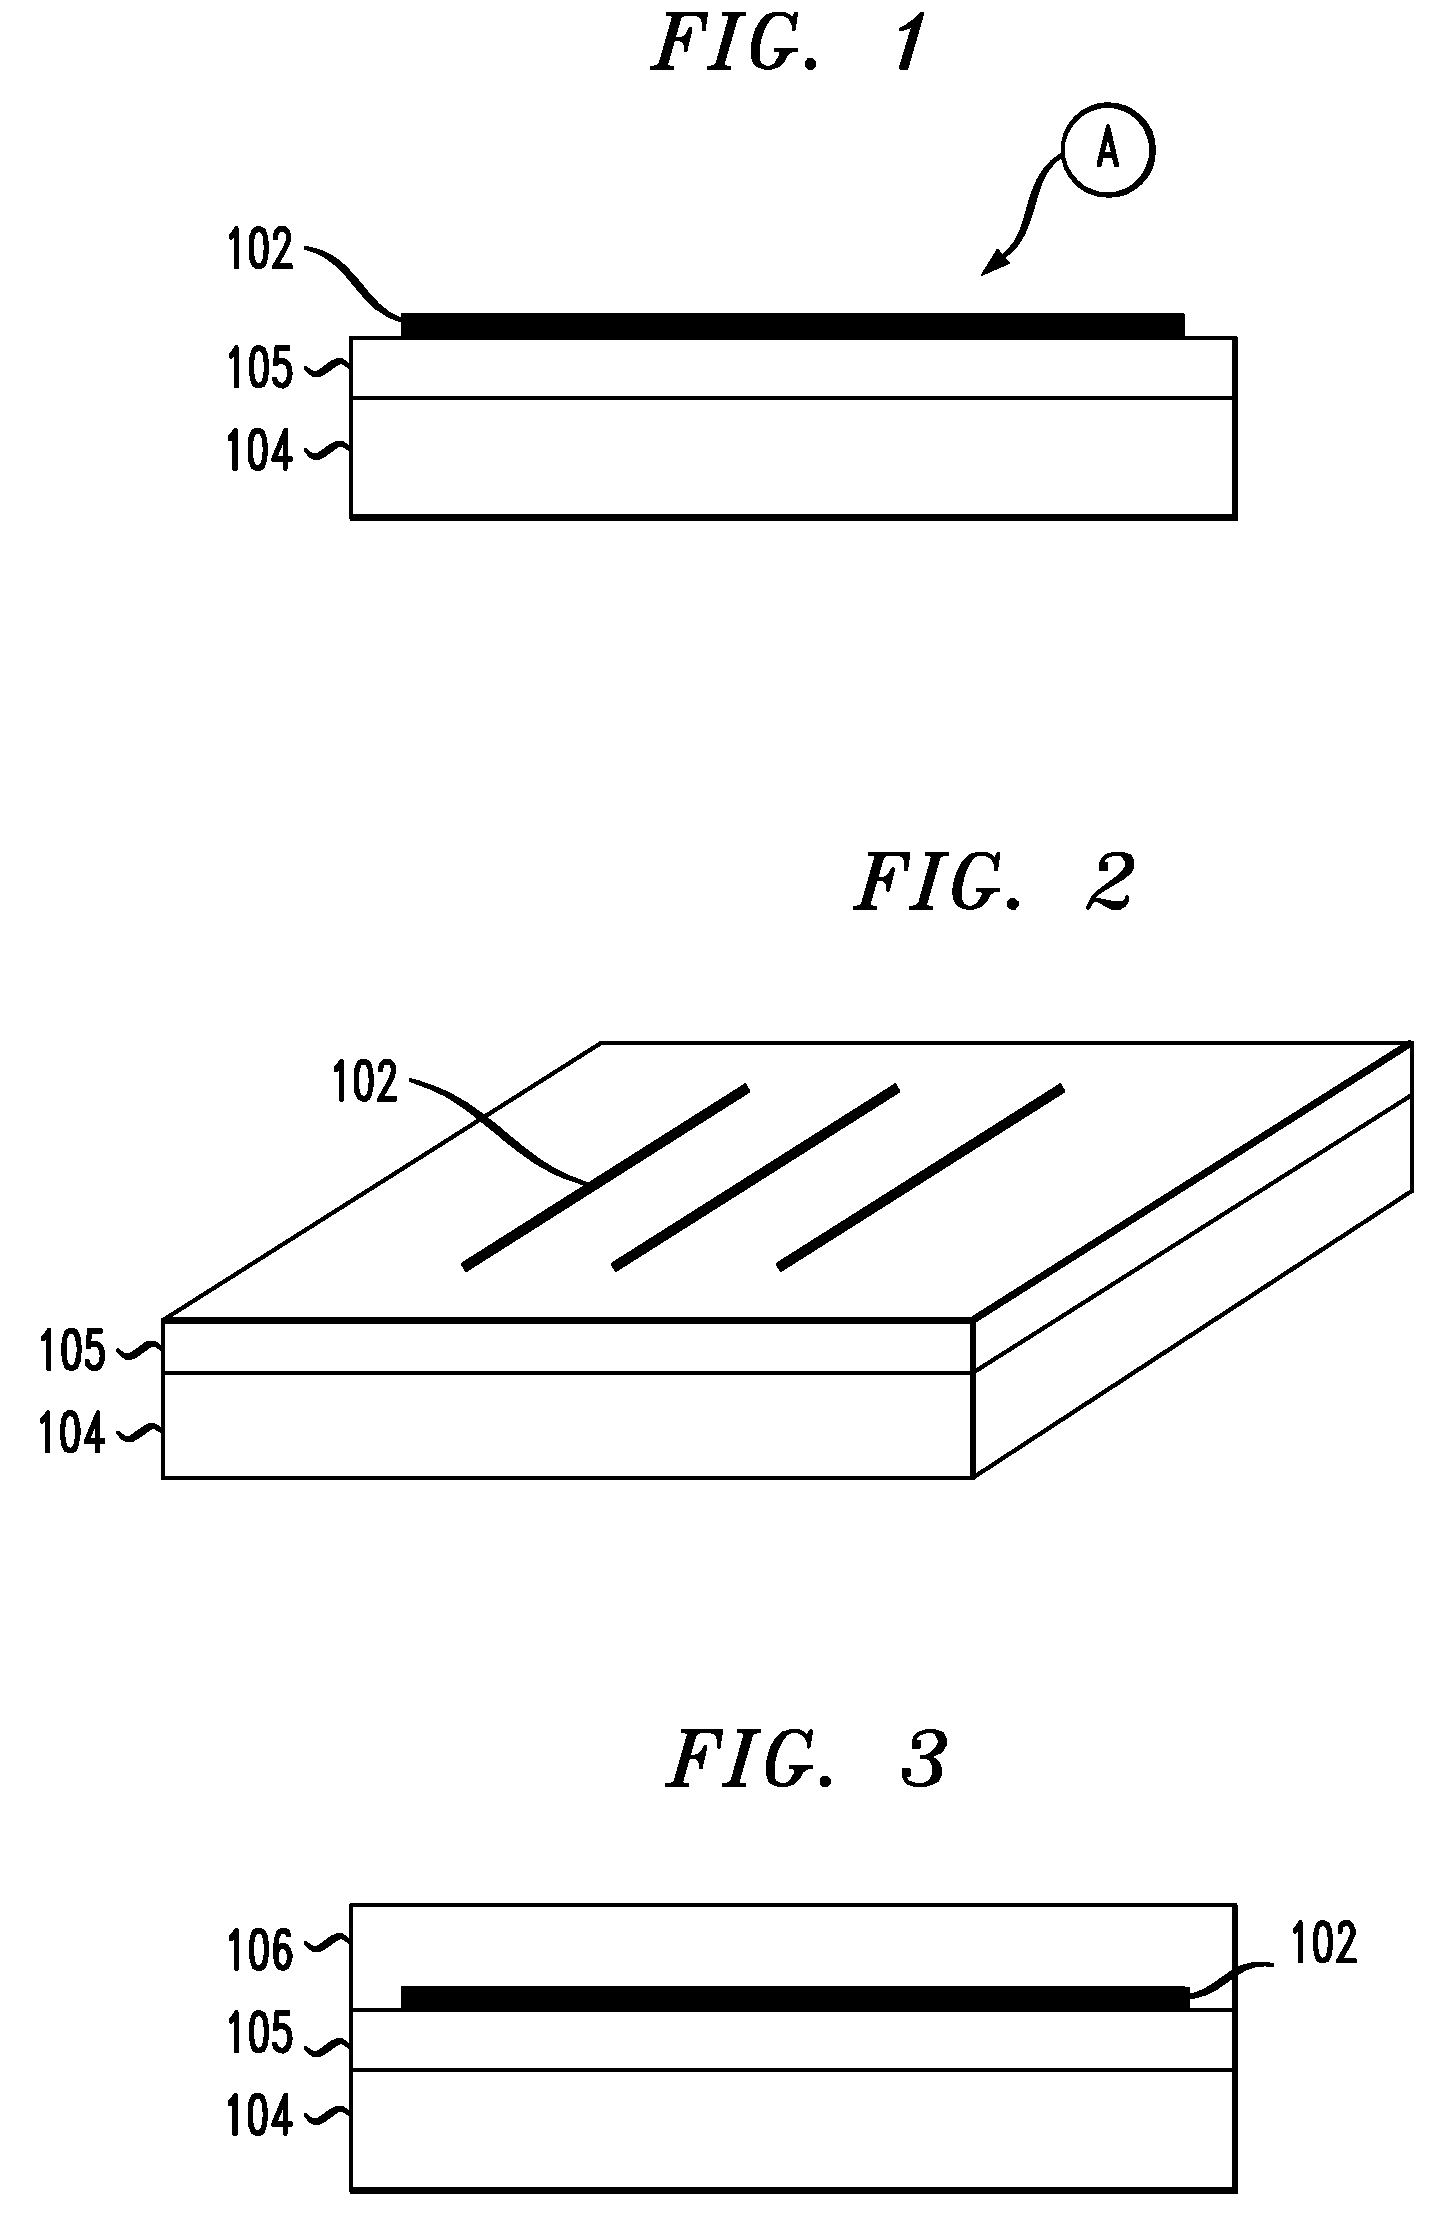 Method to fabricate high performance carbon nanotube transistor integrated circuits by three-dimensional integration technology